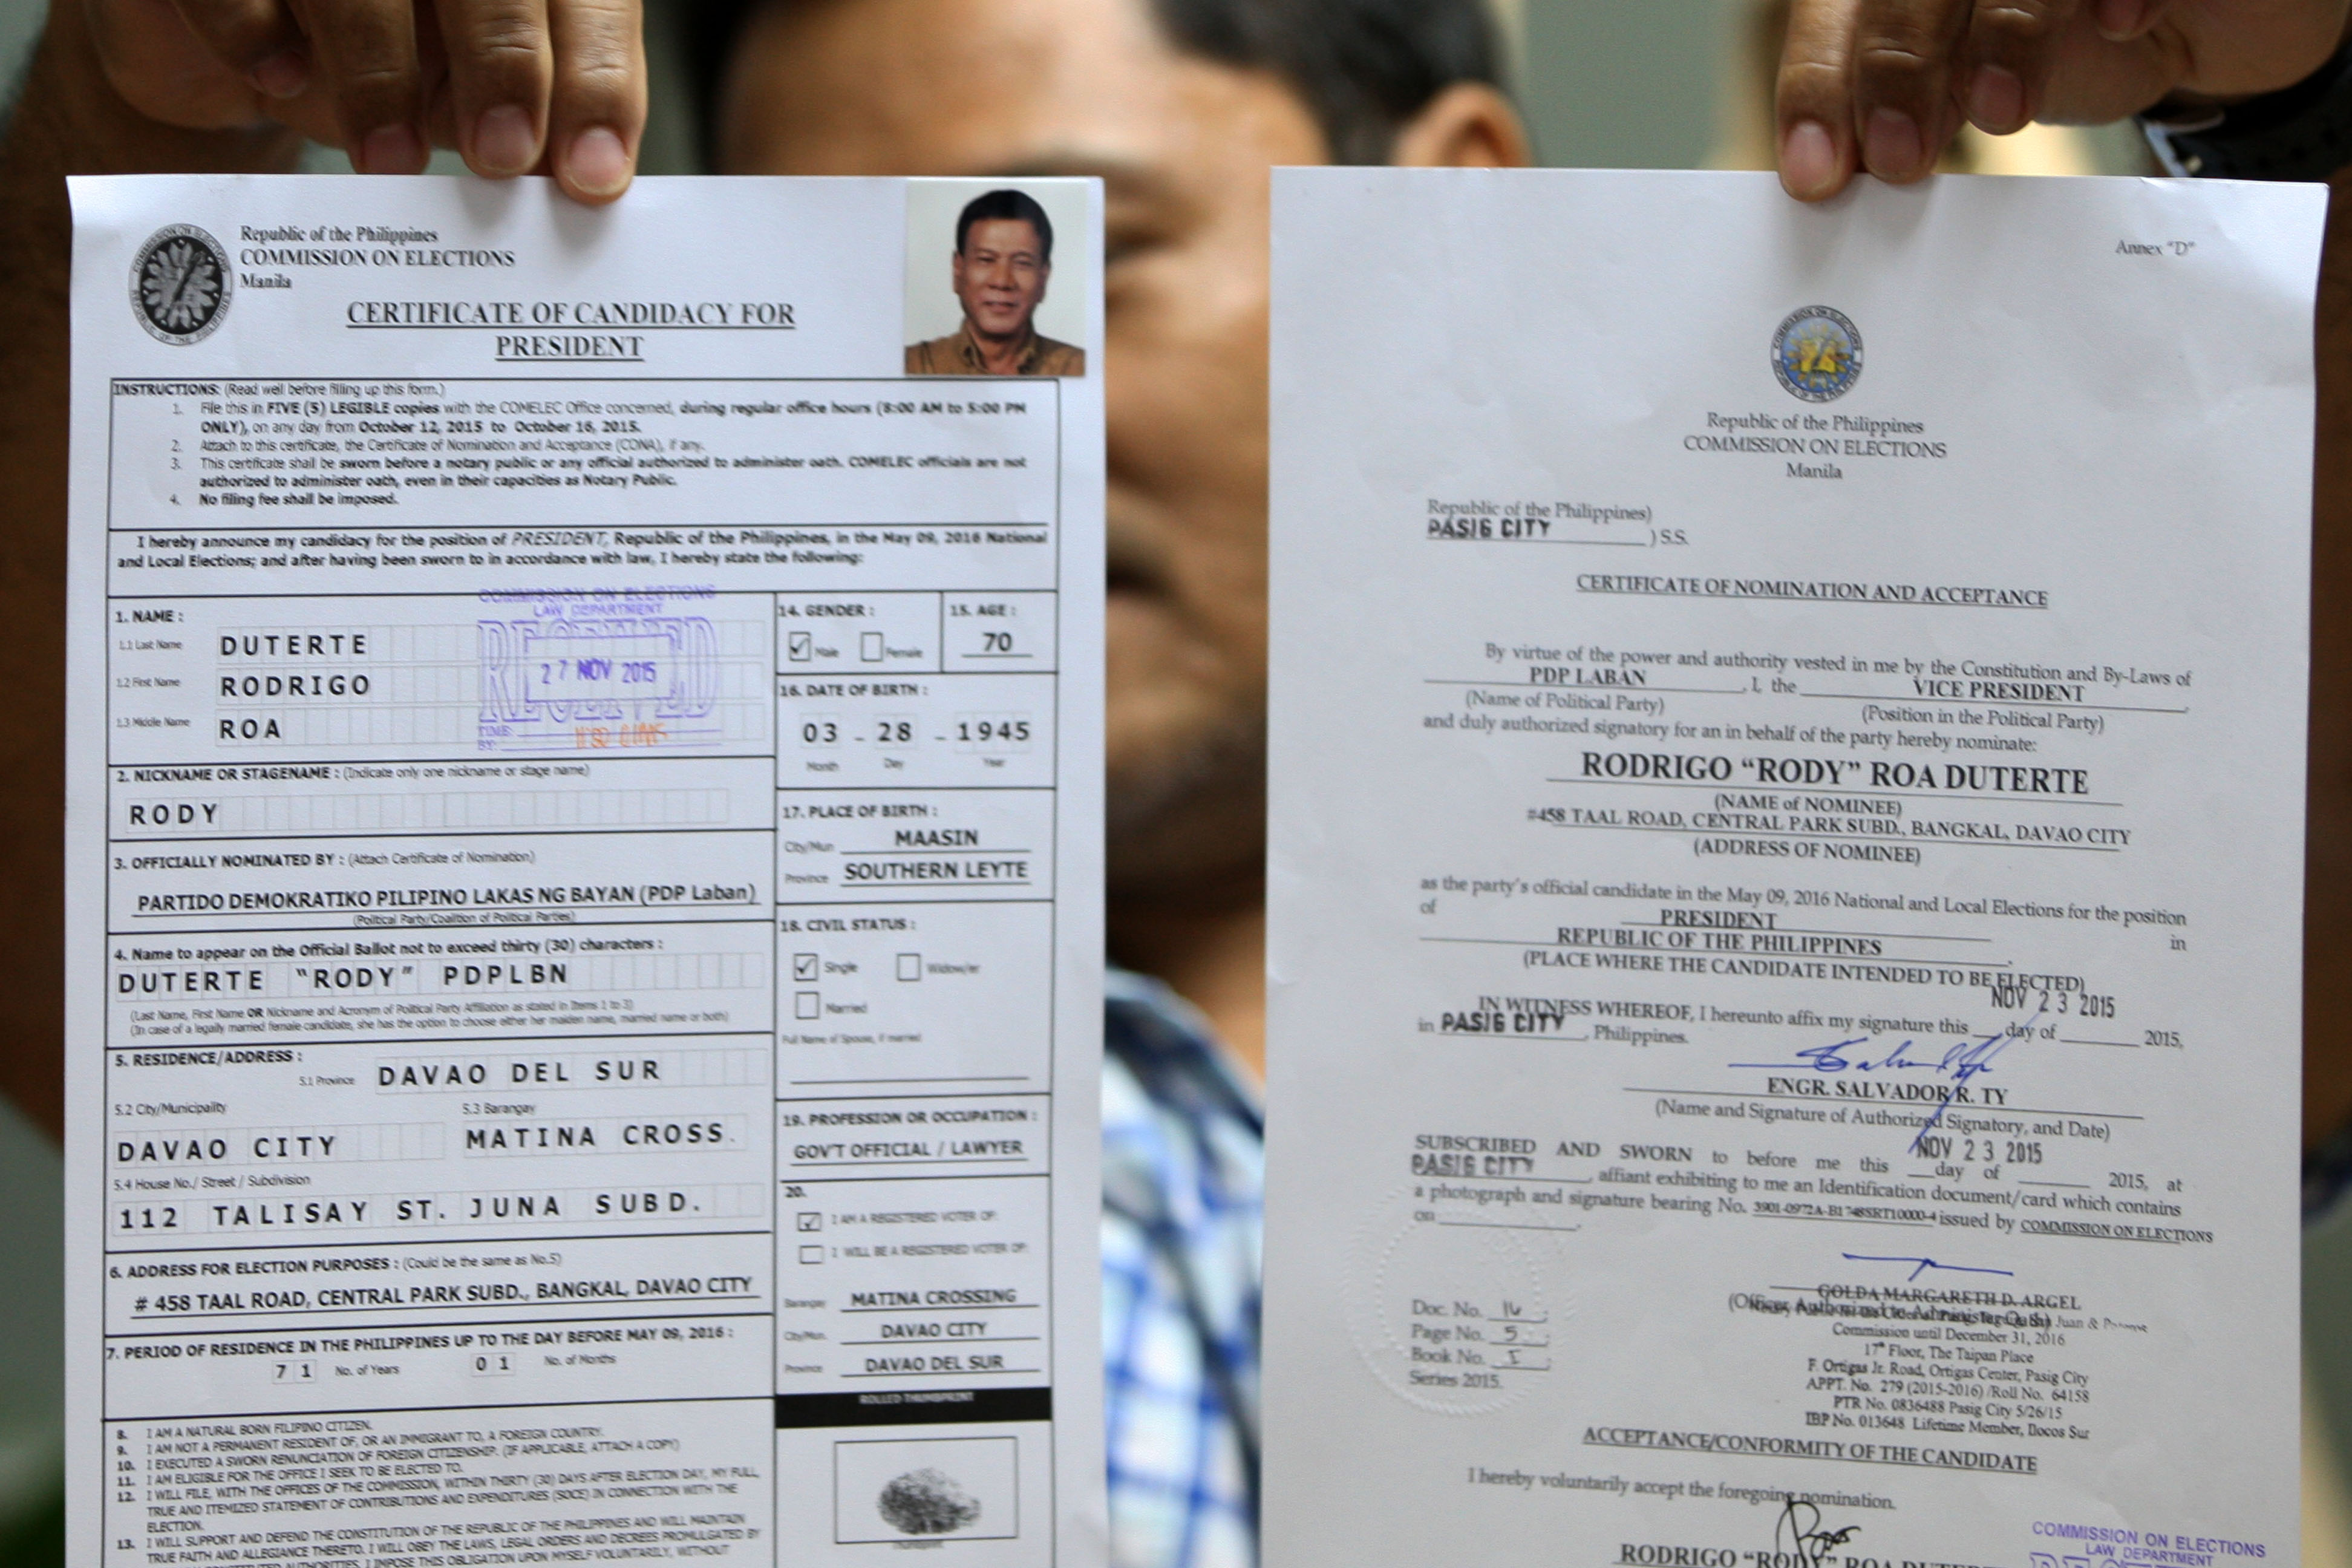 INVALID CANDIDACY? Davao City Mayor Rodrigo Duterte, who filed his certificate of candidacy (in photo) on November 27, 2015, faces the first petition against his presidential bid. A petitioner says he cannot substitute for Martin Diño, whose candidacy for president is null and void to begin with. Photo by Ben Nabong/Rappler  